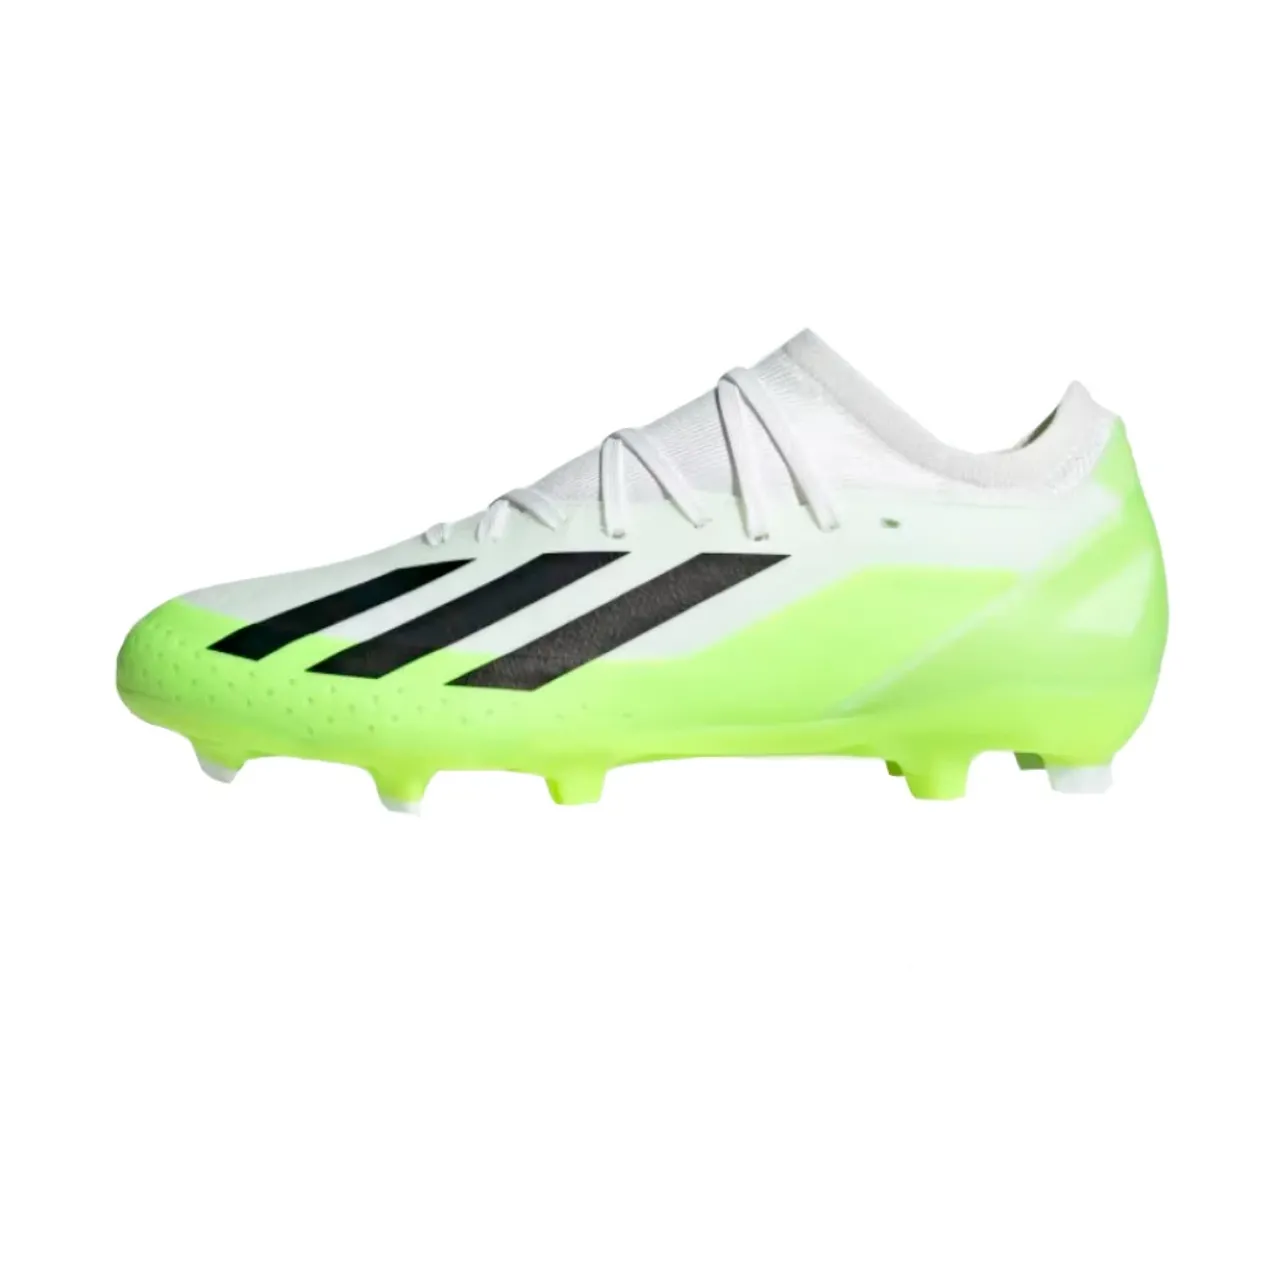 Adidas , Lightweight Football Shoes for Crazy Speed ,White male, Sizes: